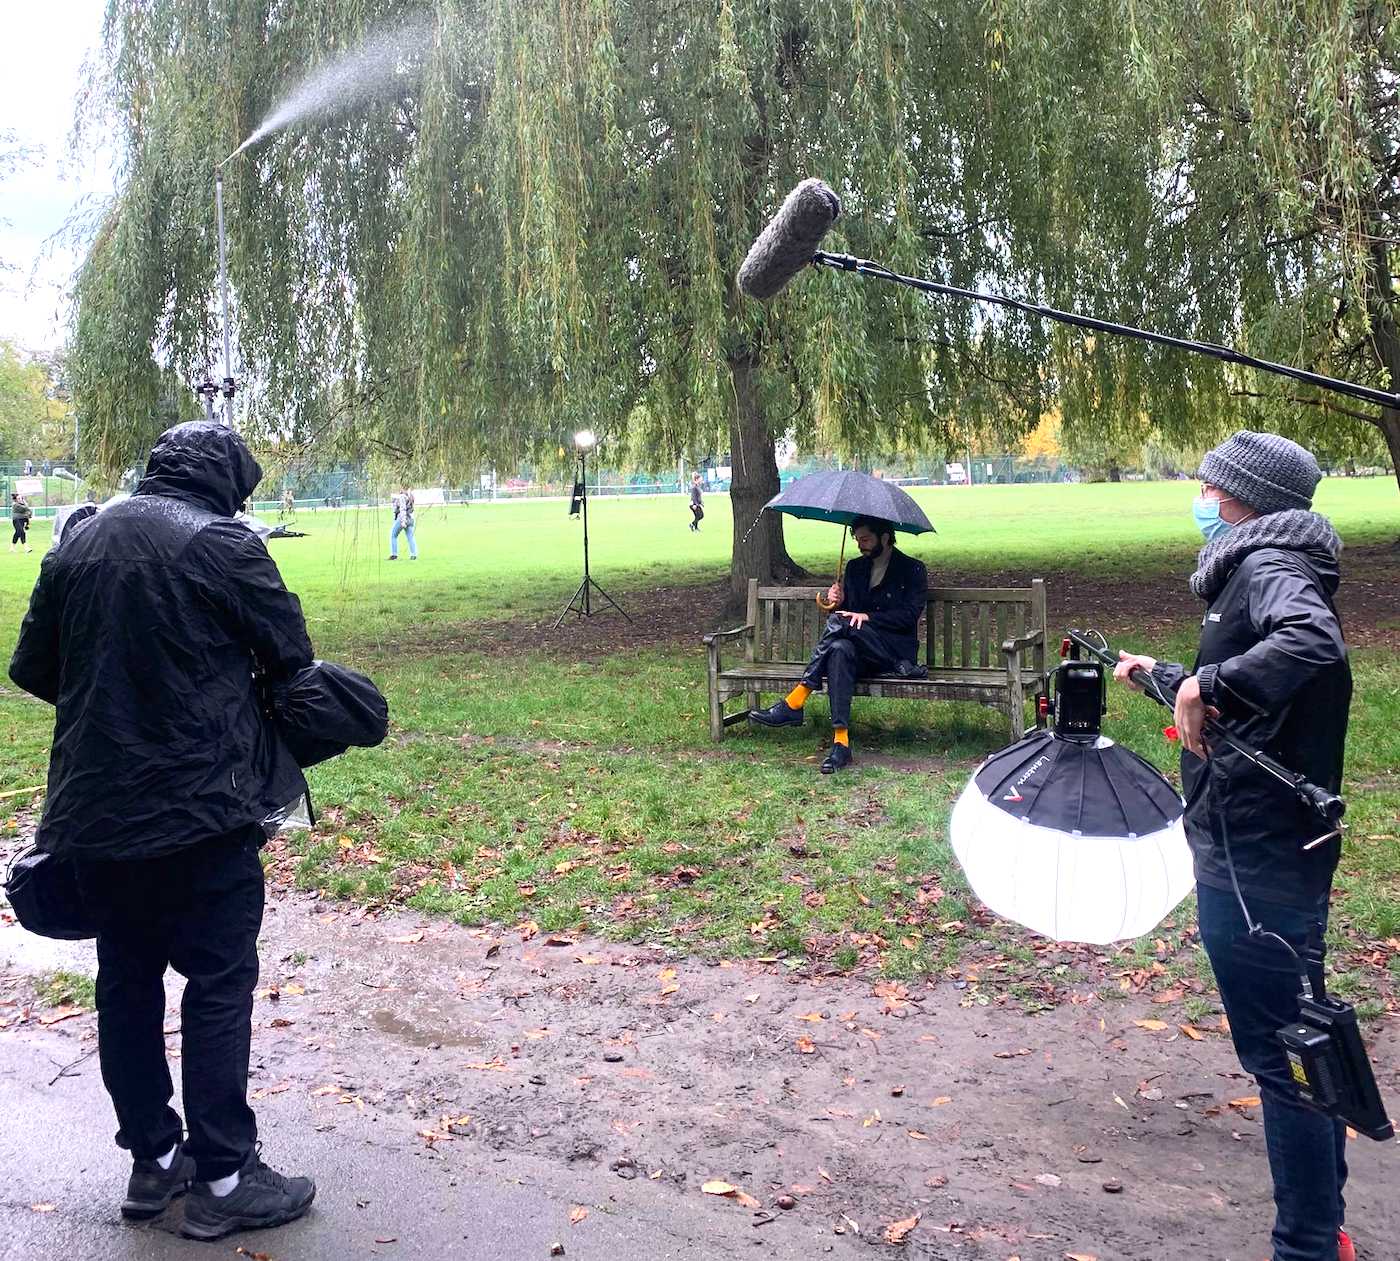 Filming an advert with actor Michael Fox in a park